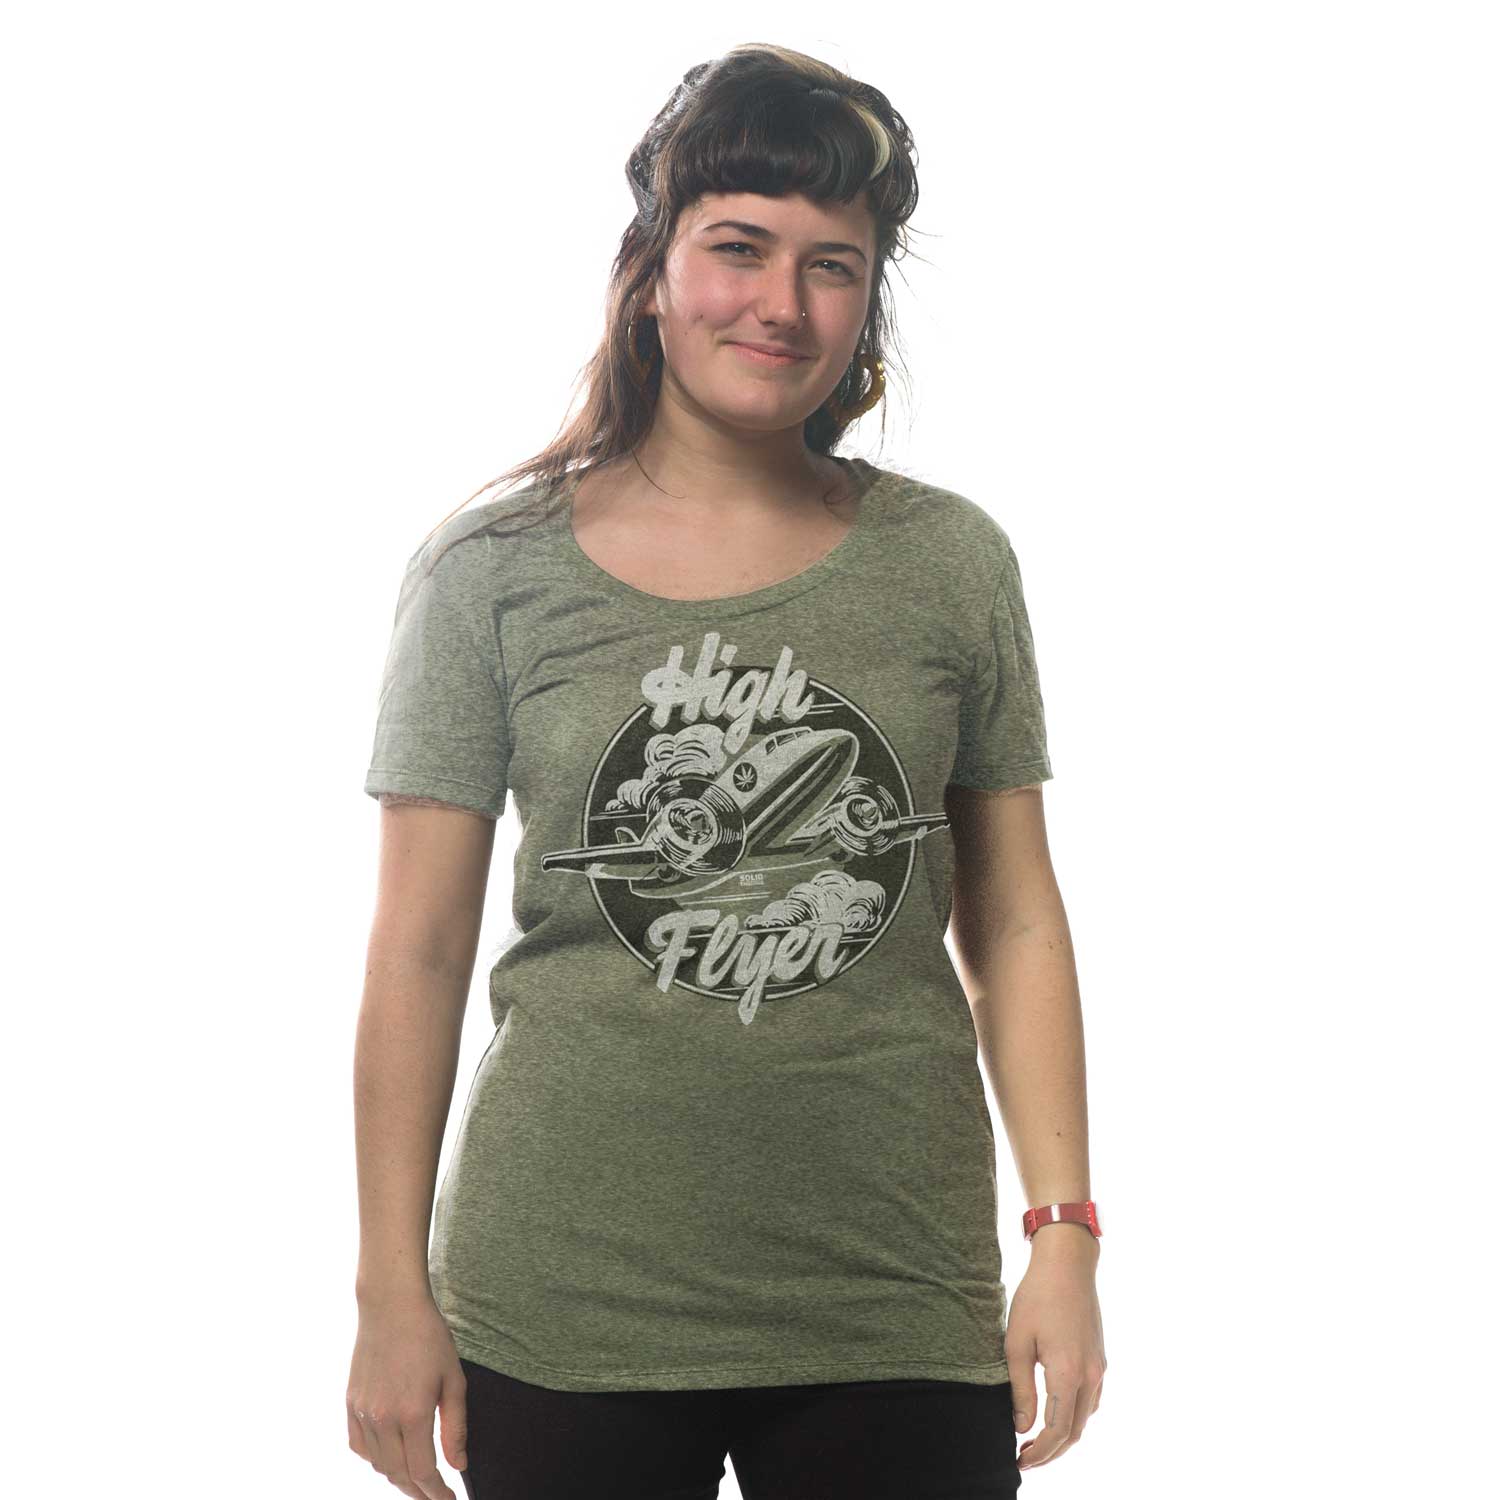 Women's High Flyer Vintage Airplane Graphic T-Shirt | Funny Marijuana Tee on Model | Solid Threads